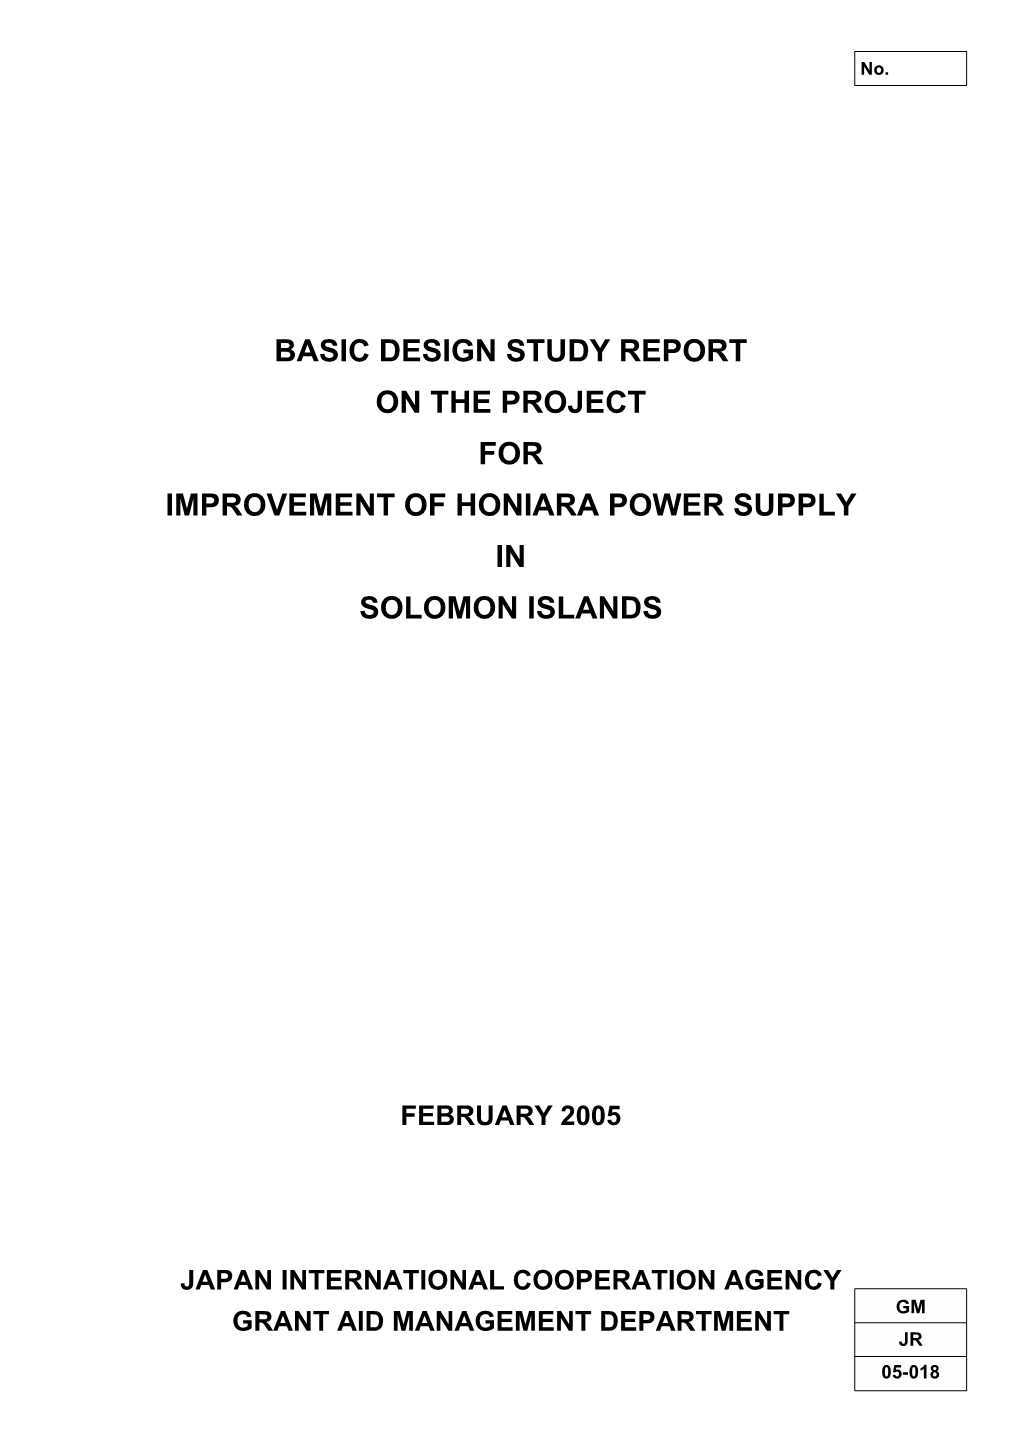 Basic Design Study Report on the Project for Improvement of Honiara Power Supply in Solomon Islands